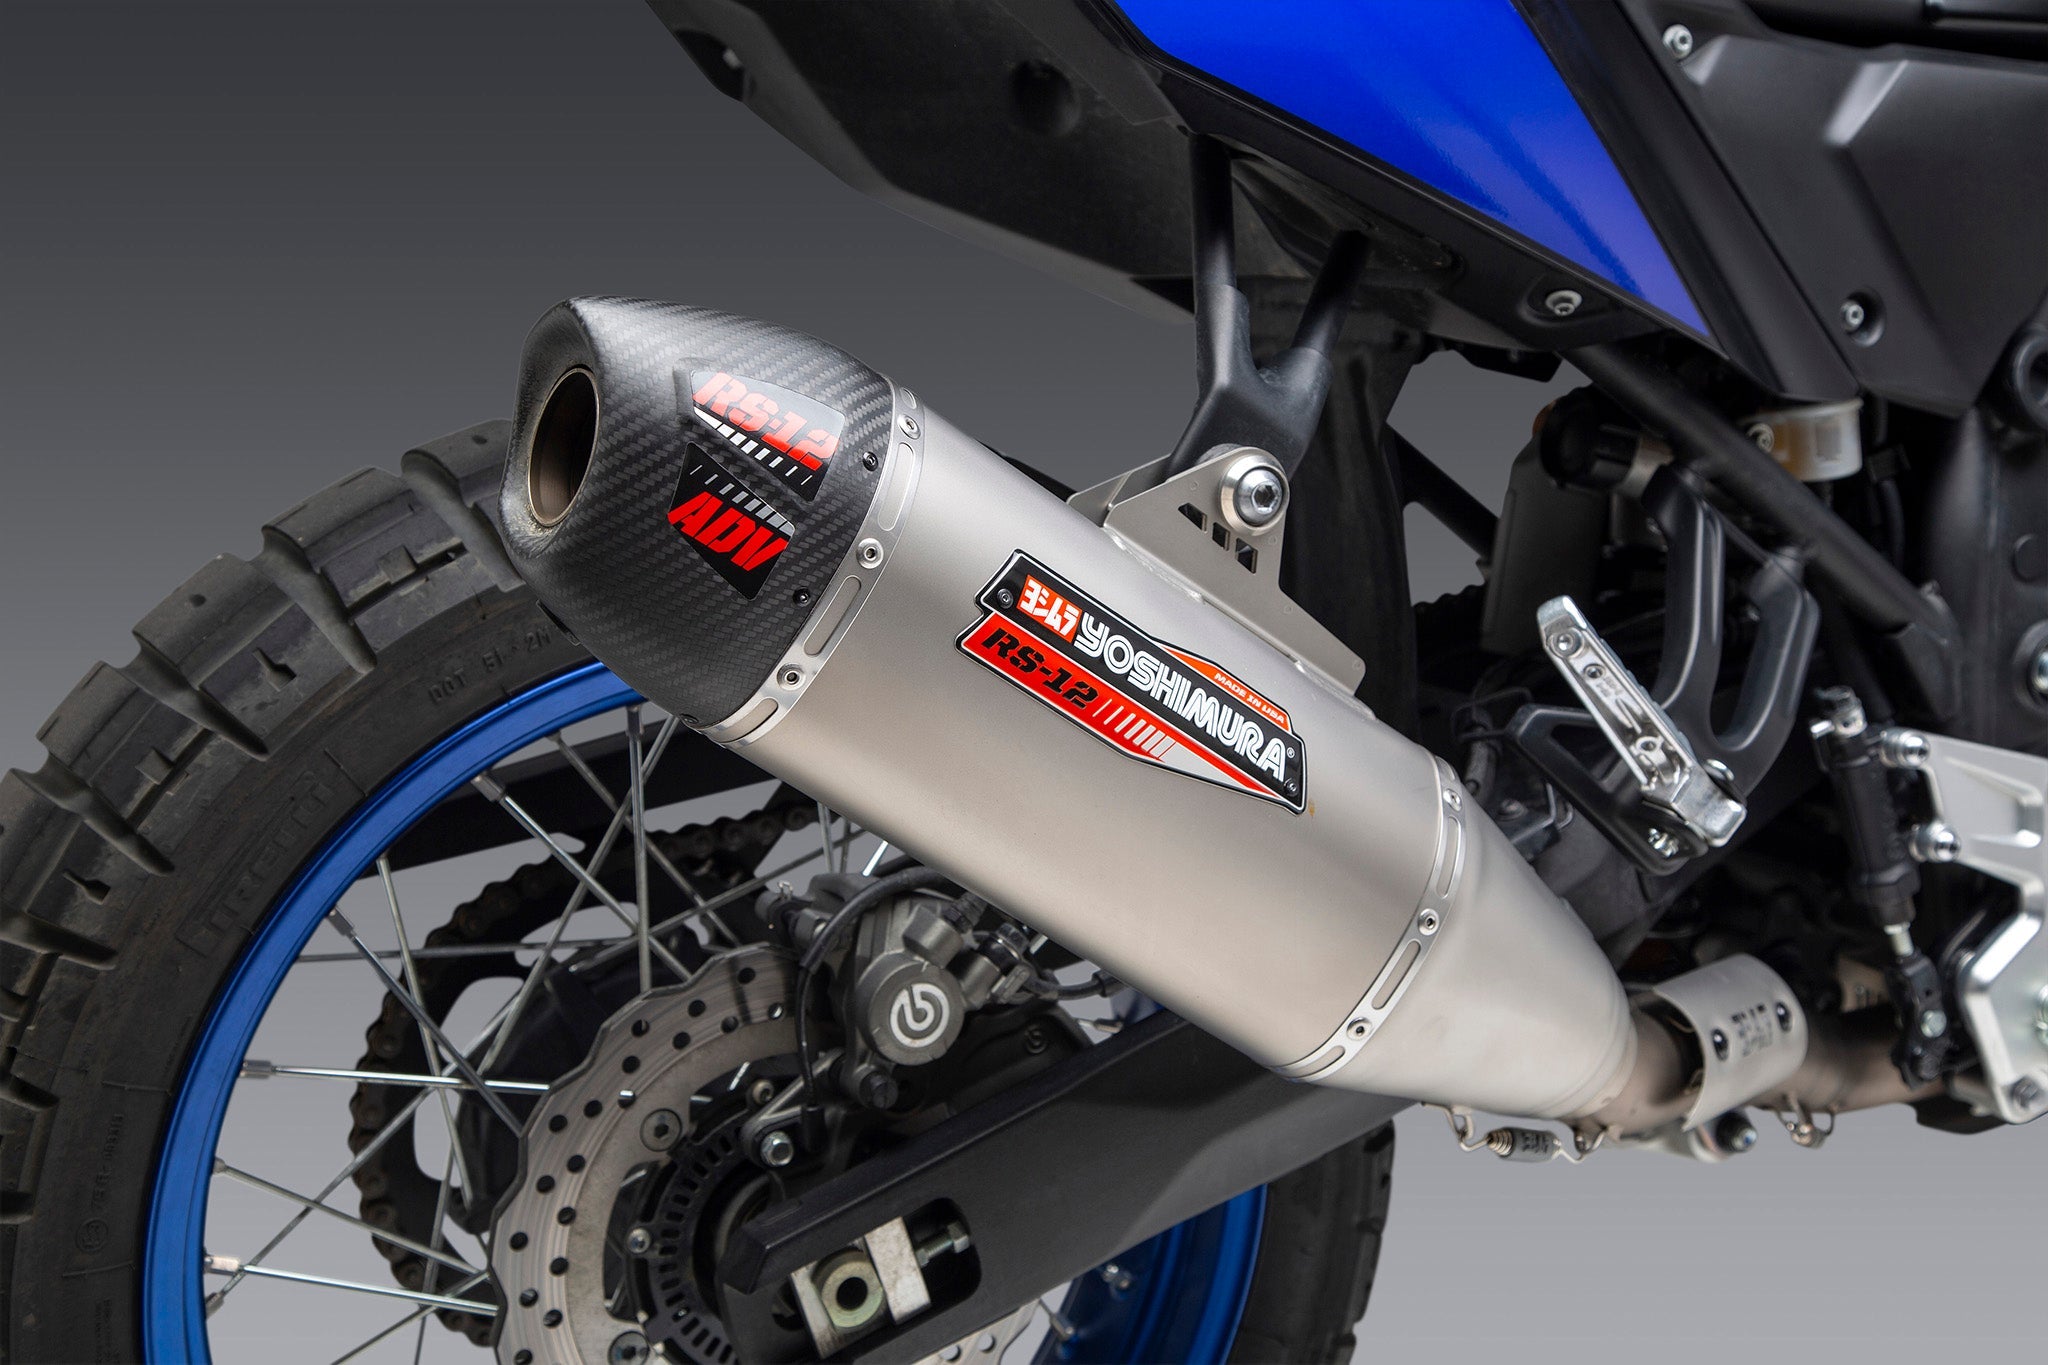 Yoshimura Tenere 700 21-22 Rs-12 Stainless Full Exhaust, Stainless